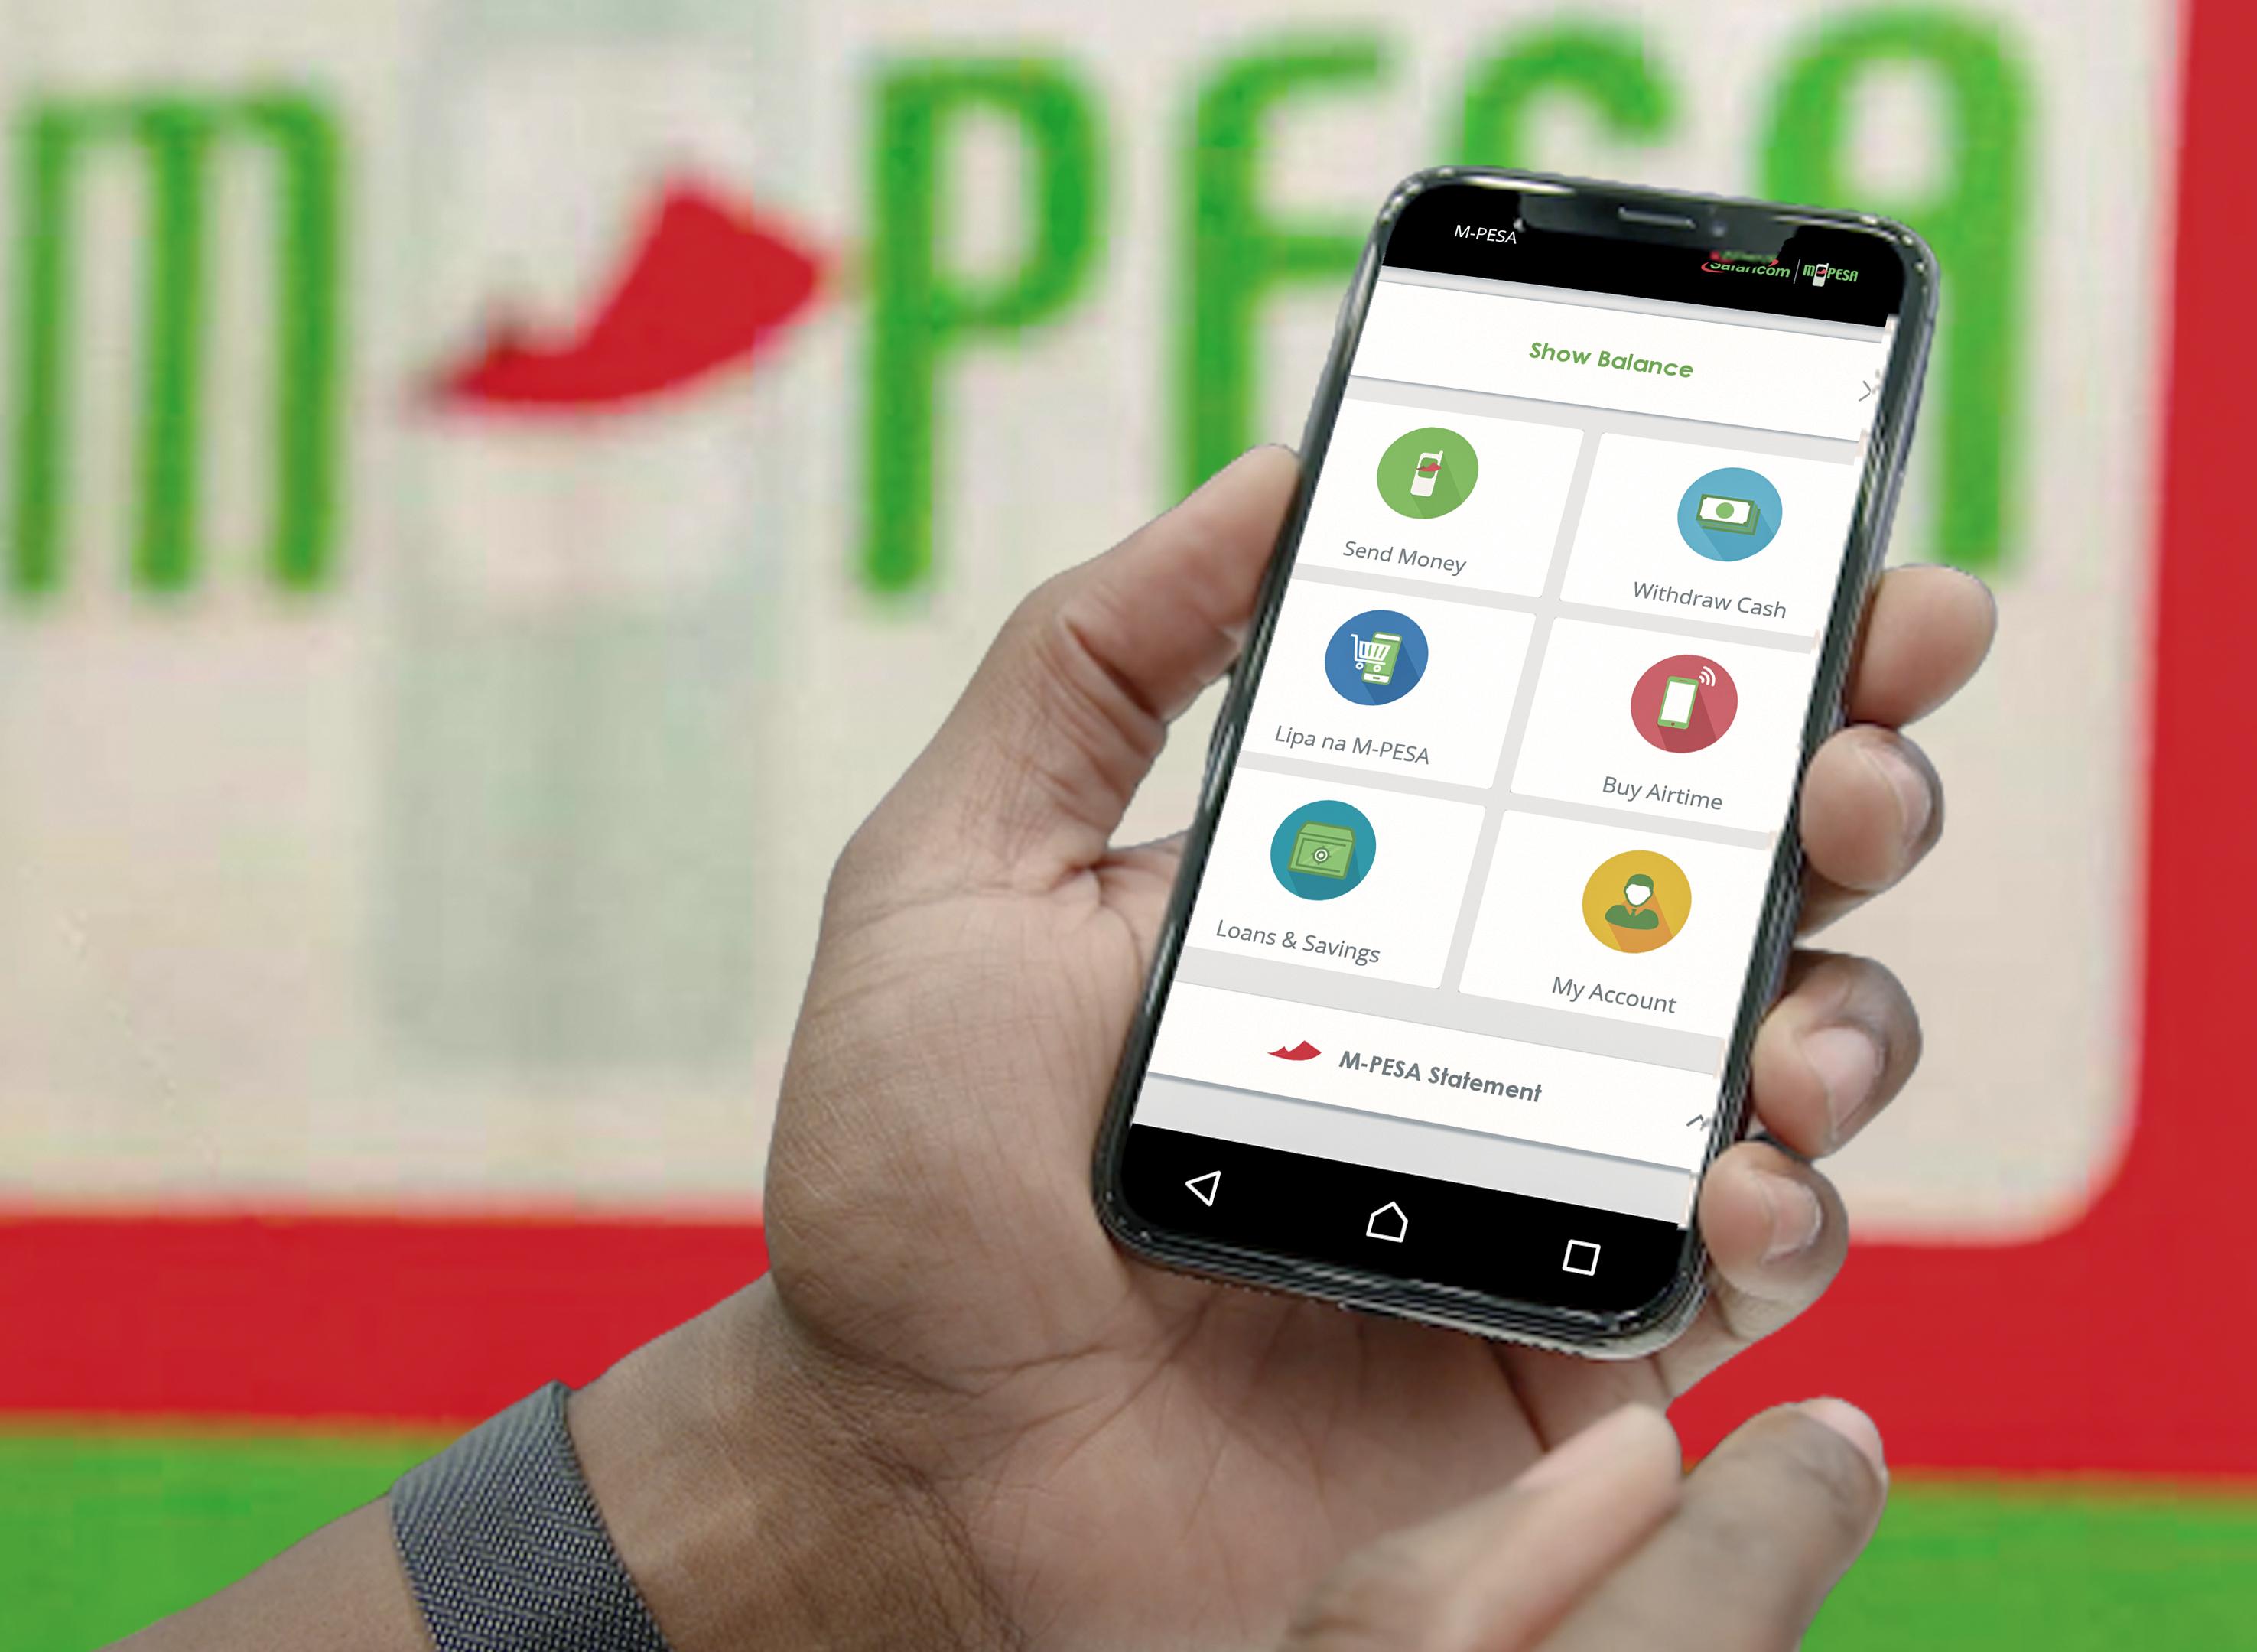 What next for Safaricom after M-pesa buyout?